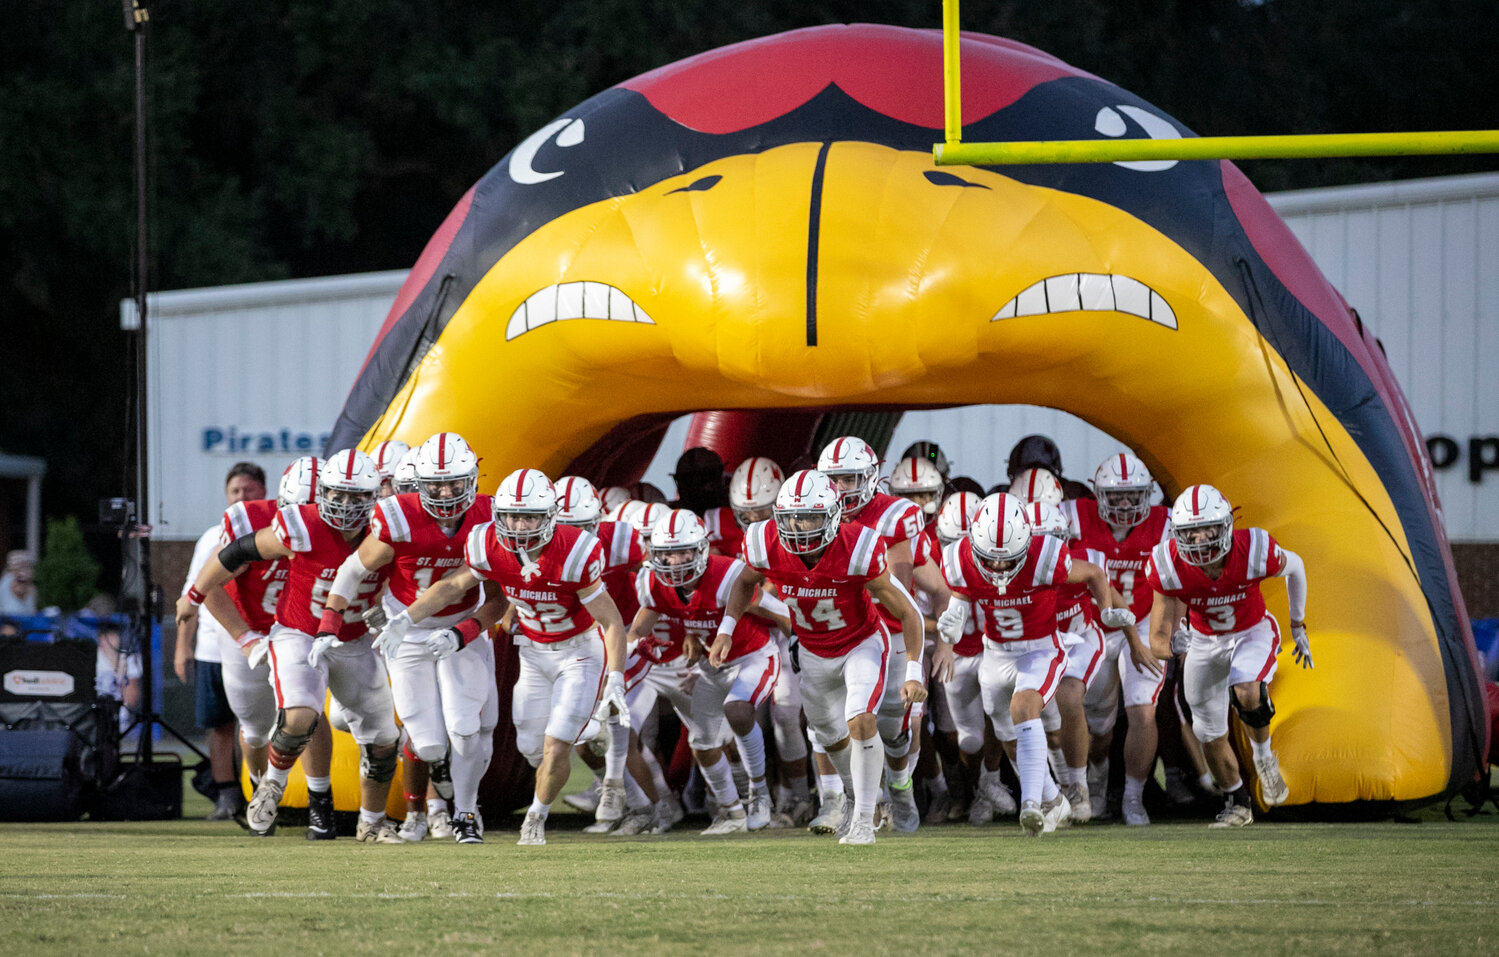 The St. Michael Cardinals emerge on W.C. Majors Field at Fairhope Municipal Stadium for Sept. 21’s Class 4A Region 1 game against the Satsuma Gators. The Cardinals will be heading to the playoffs for the first time after they set a single-season scoring record Friday.